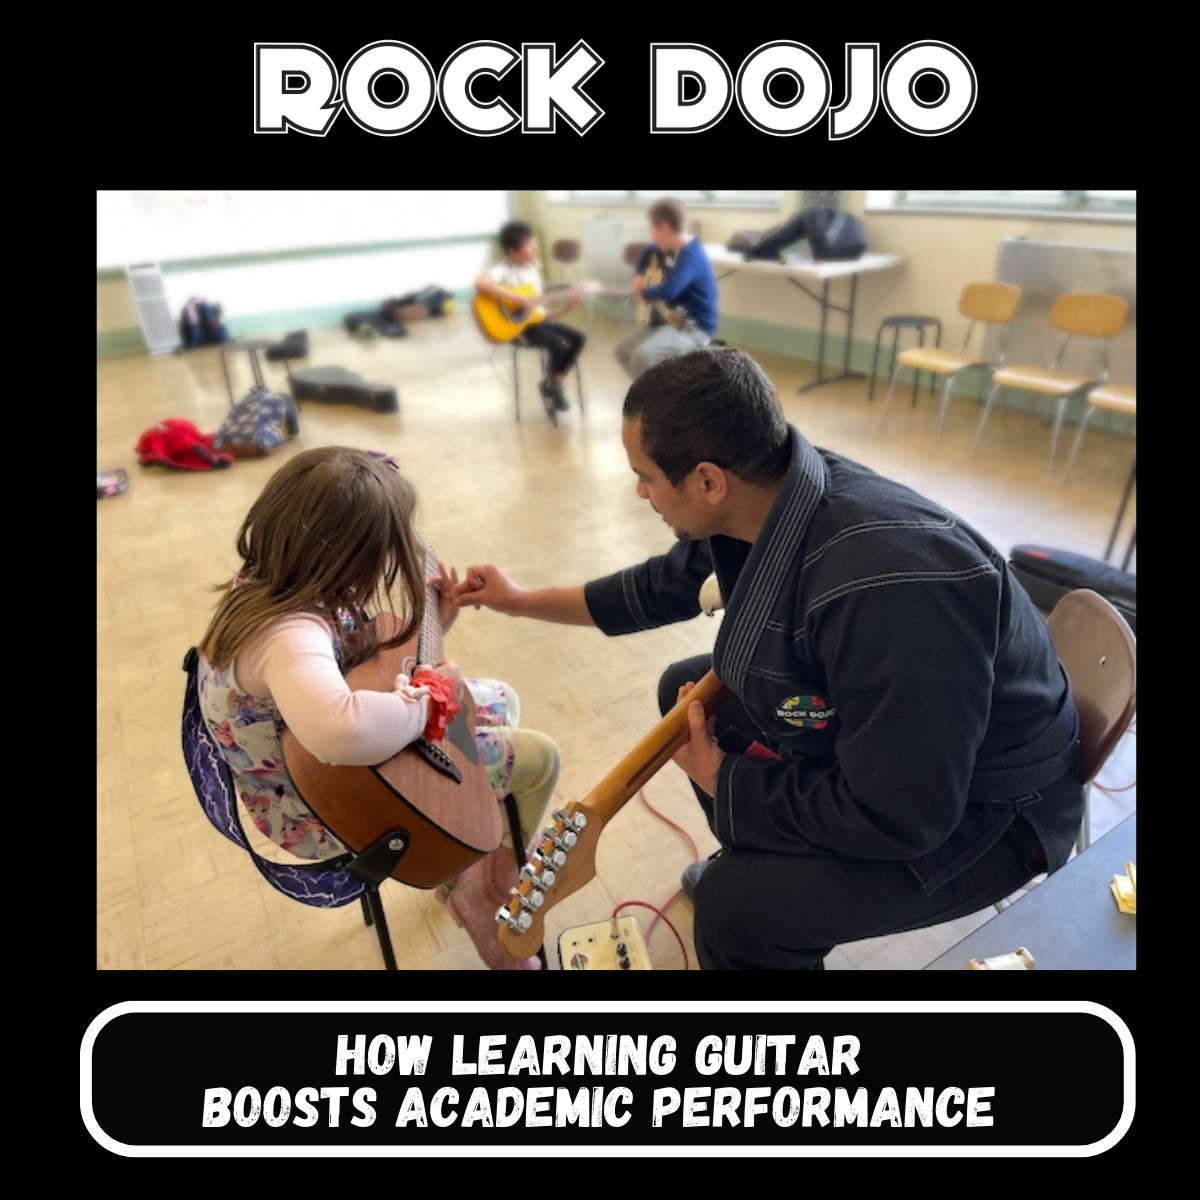 Young student passionately learning guitar with Rock Dojo's online curriculum.